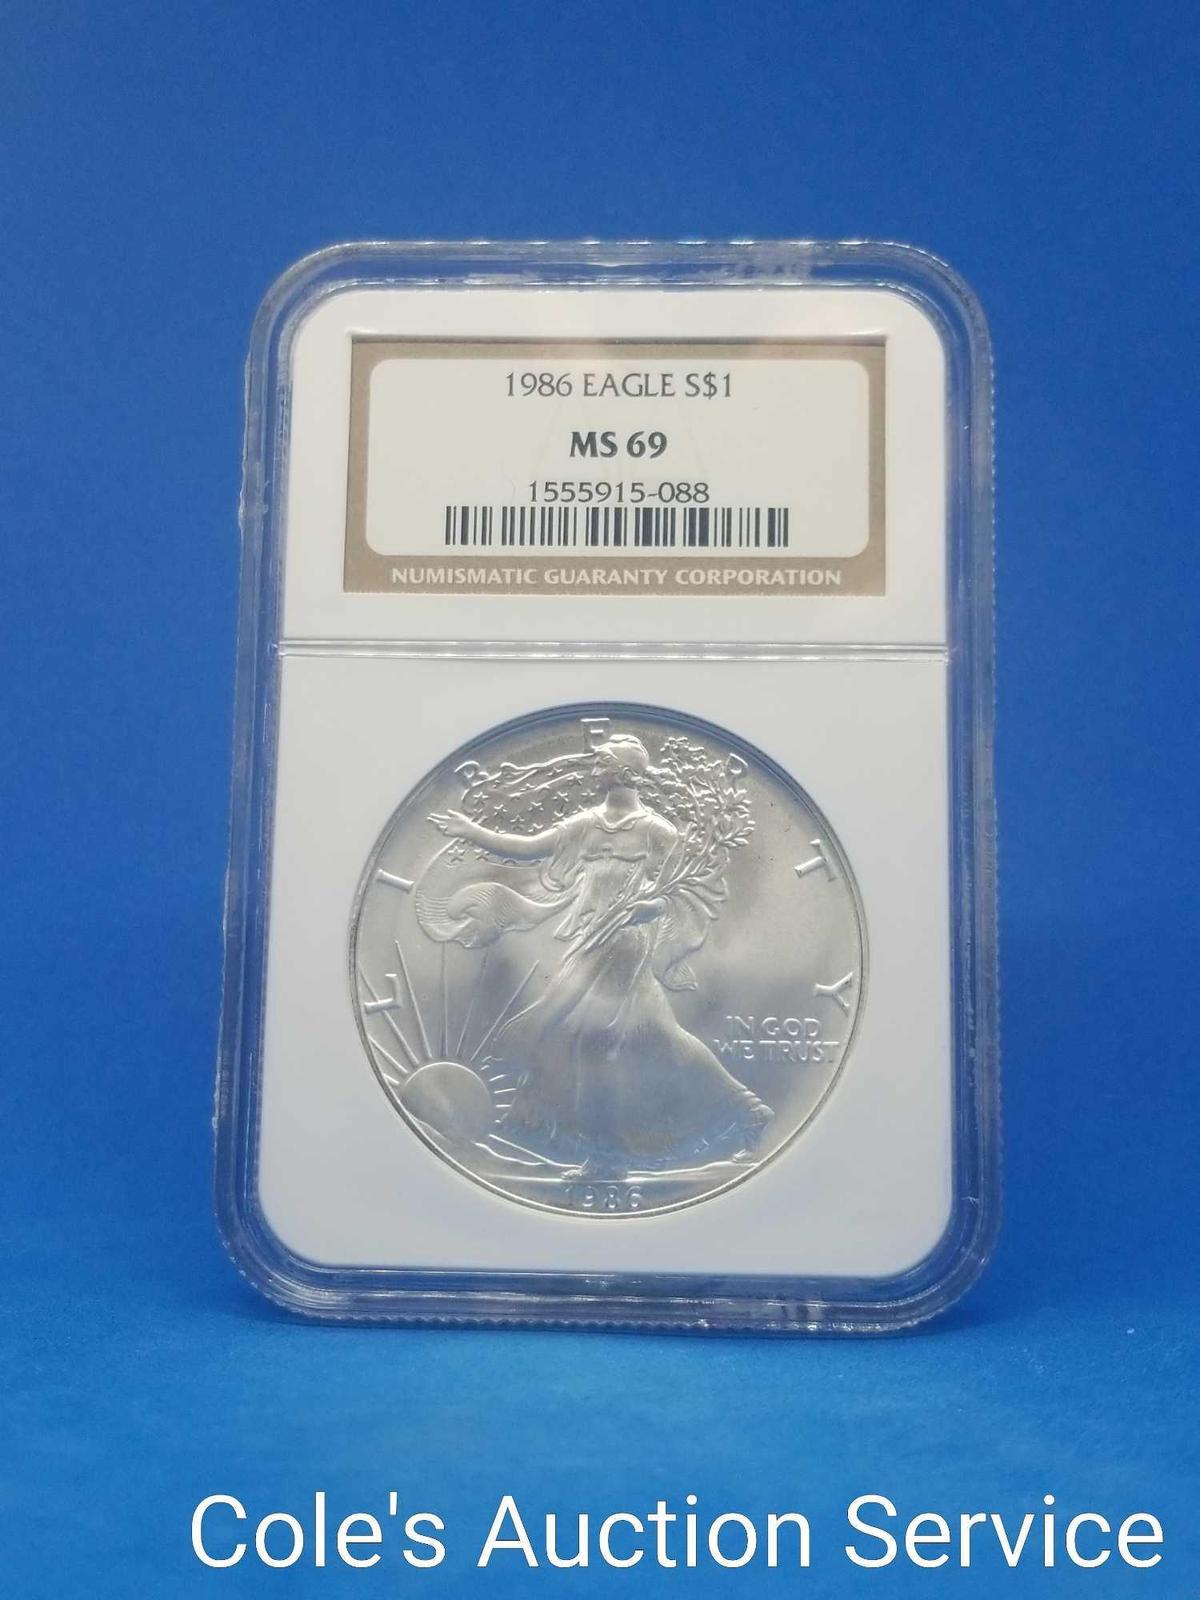 1986 United States mint silver eagle dollar. Graded MS69 by NGC.